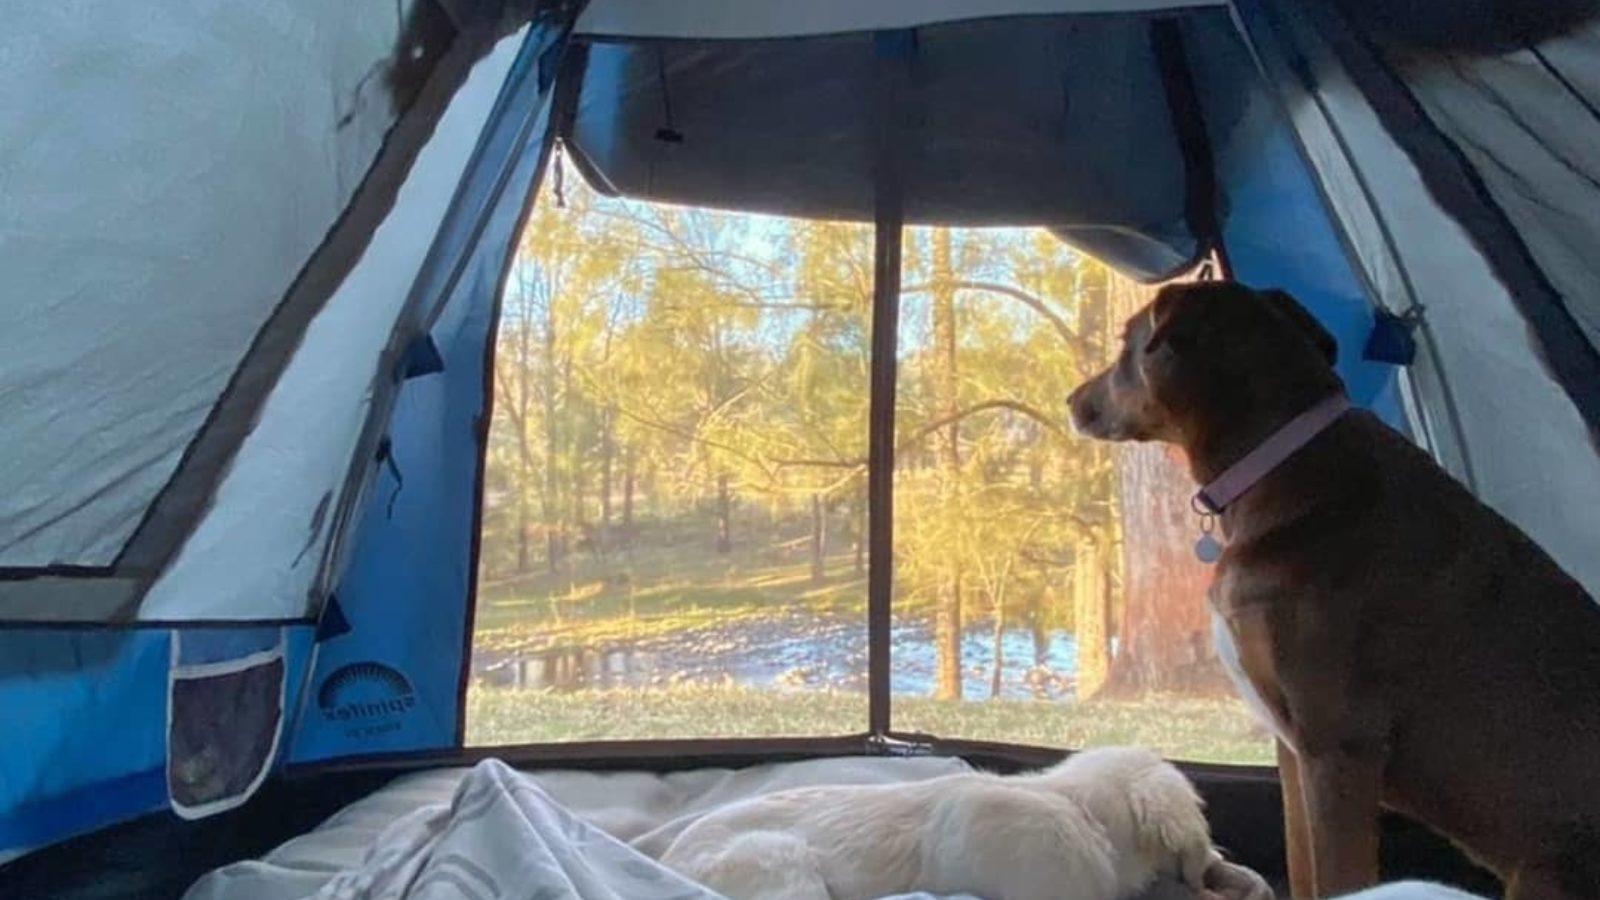 Being a State Forest Campground means you can bring your four legged friend